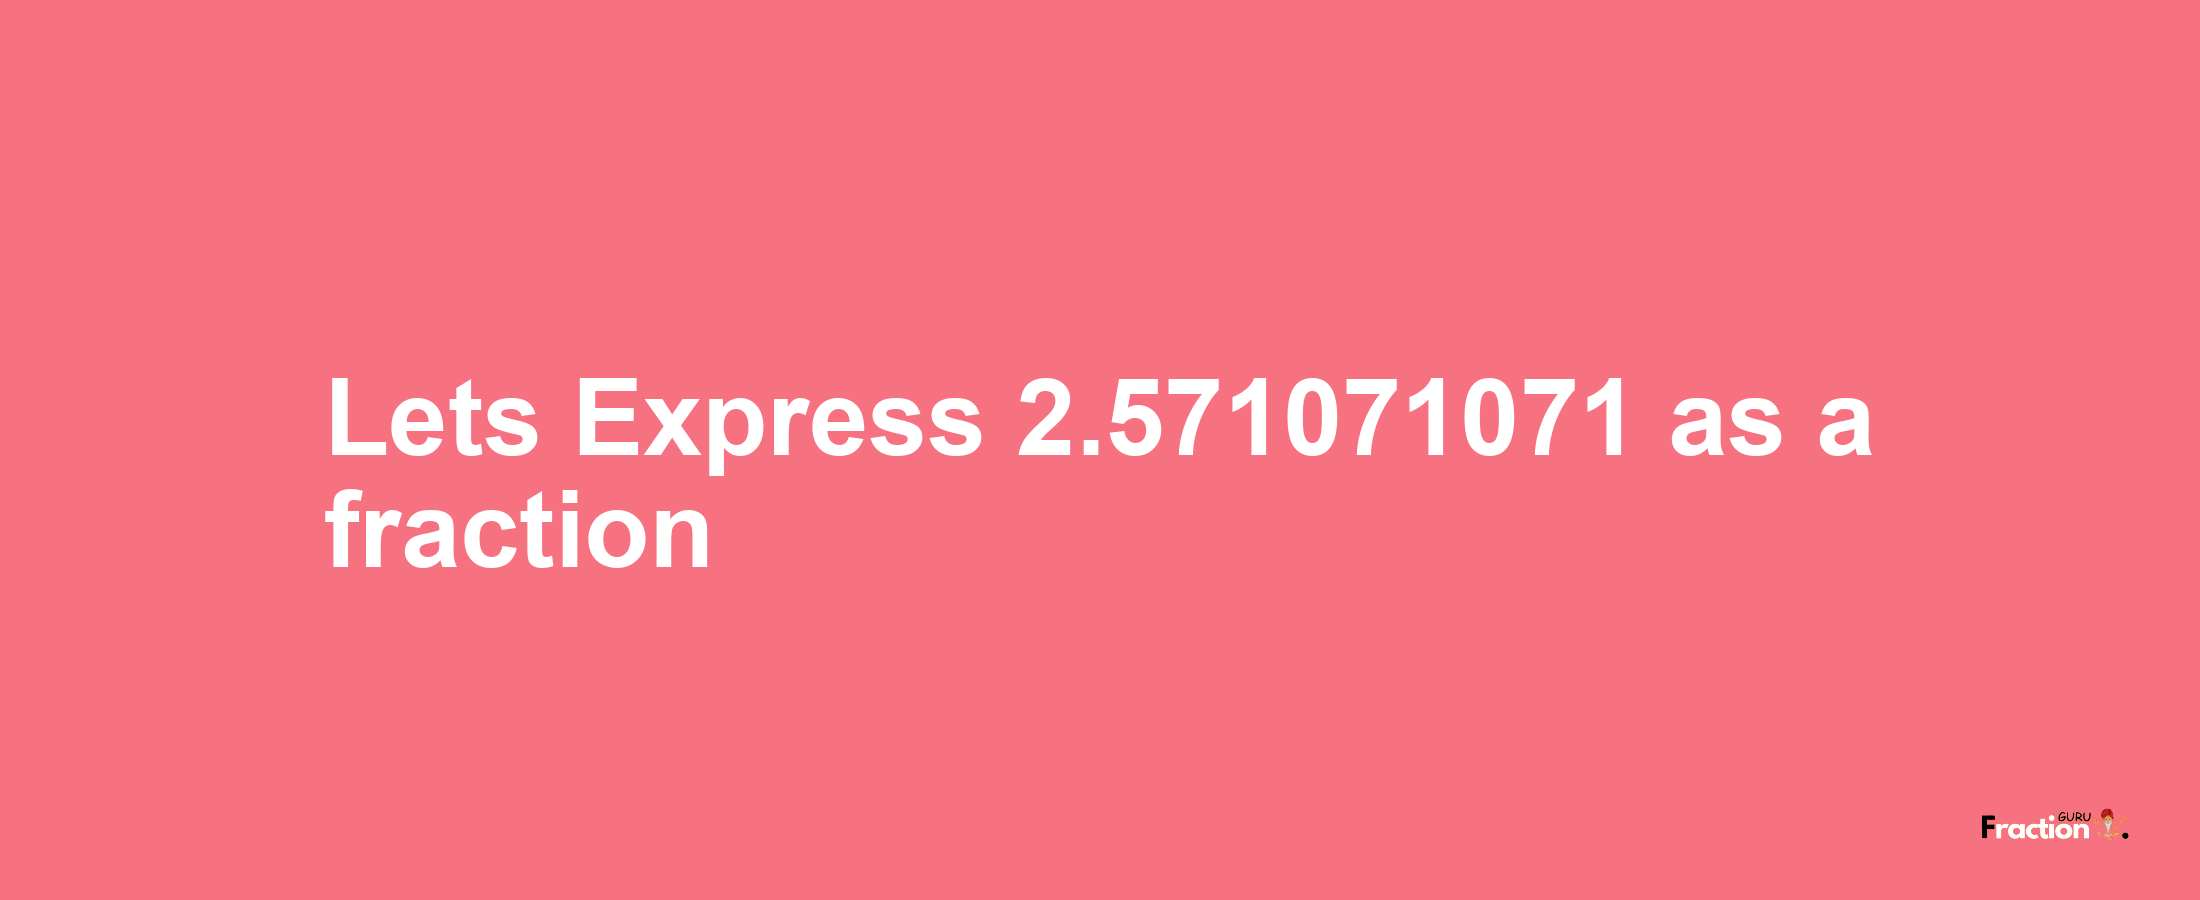 Lets Express 2.571071071 as afraction